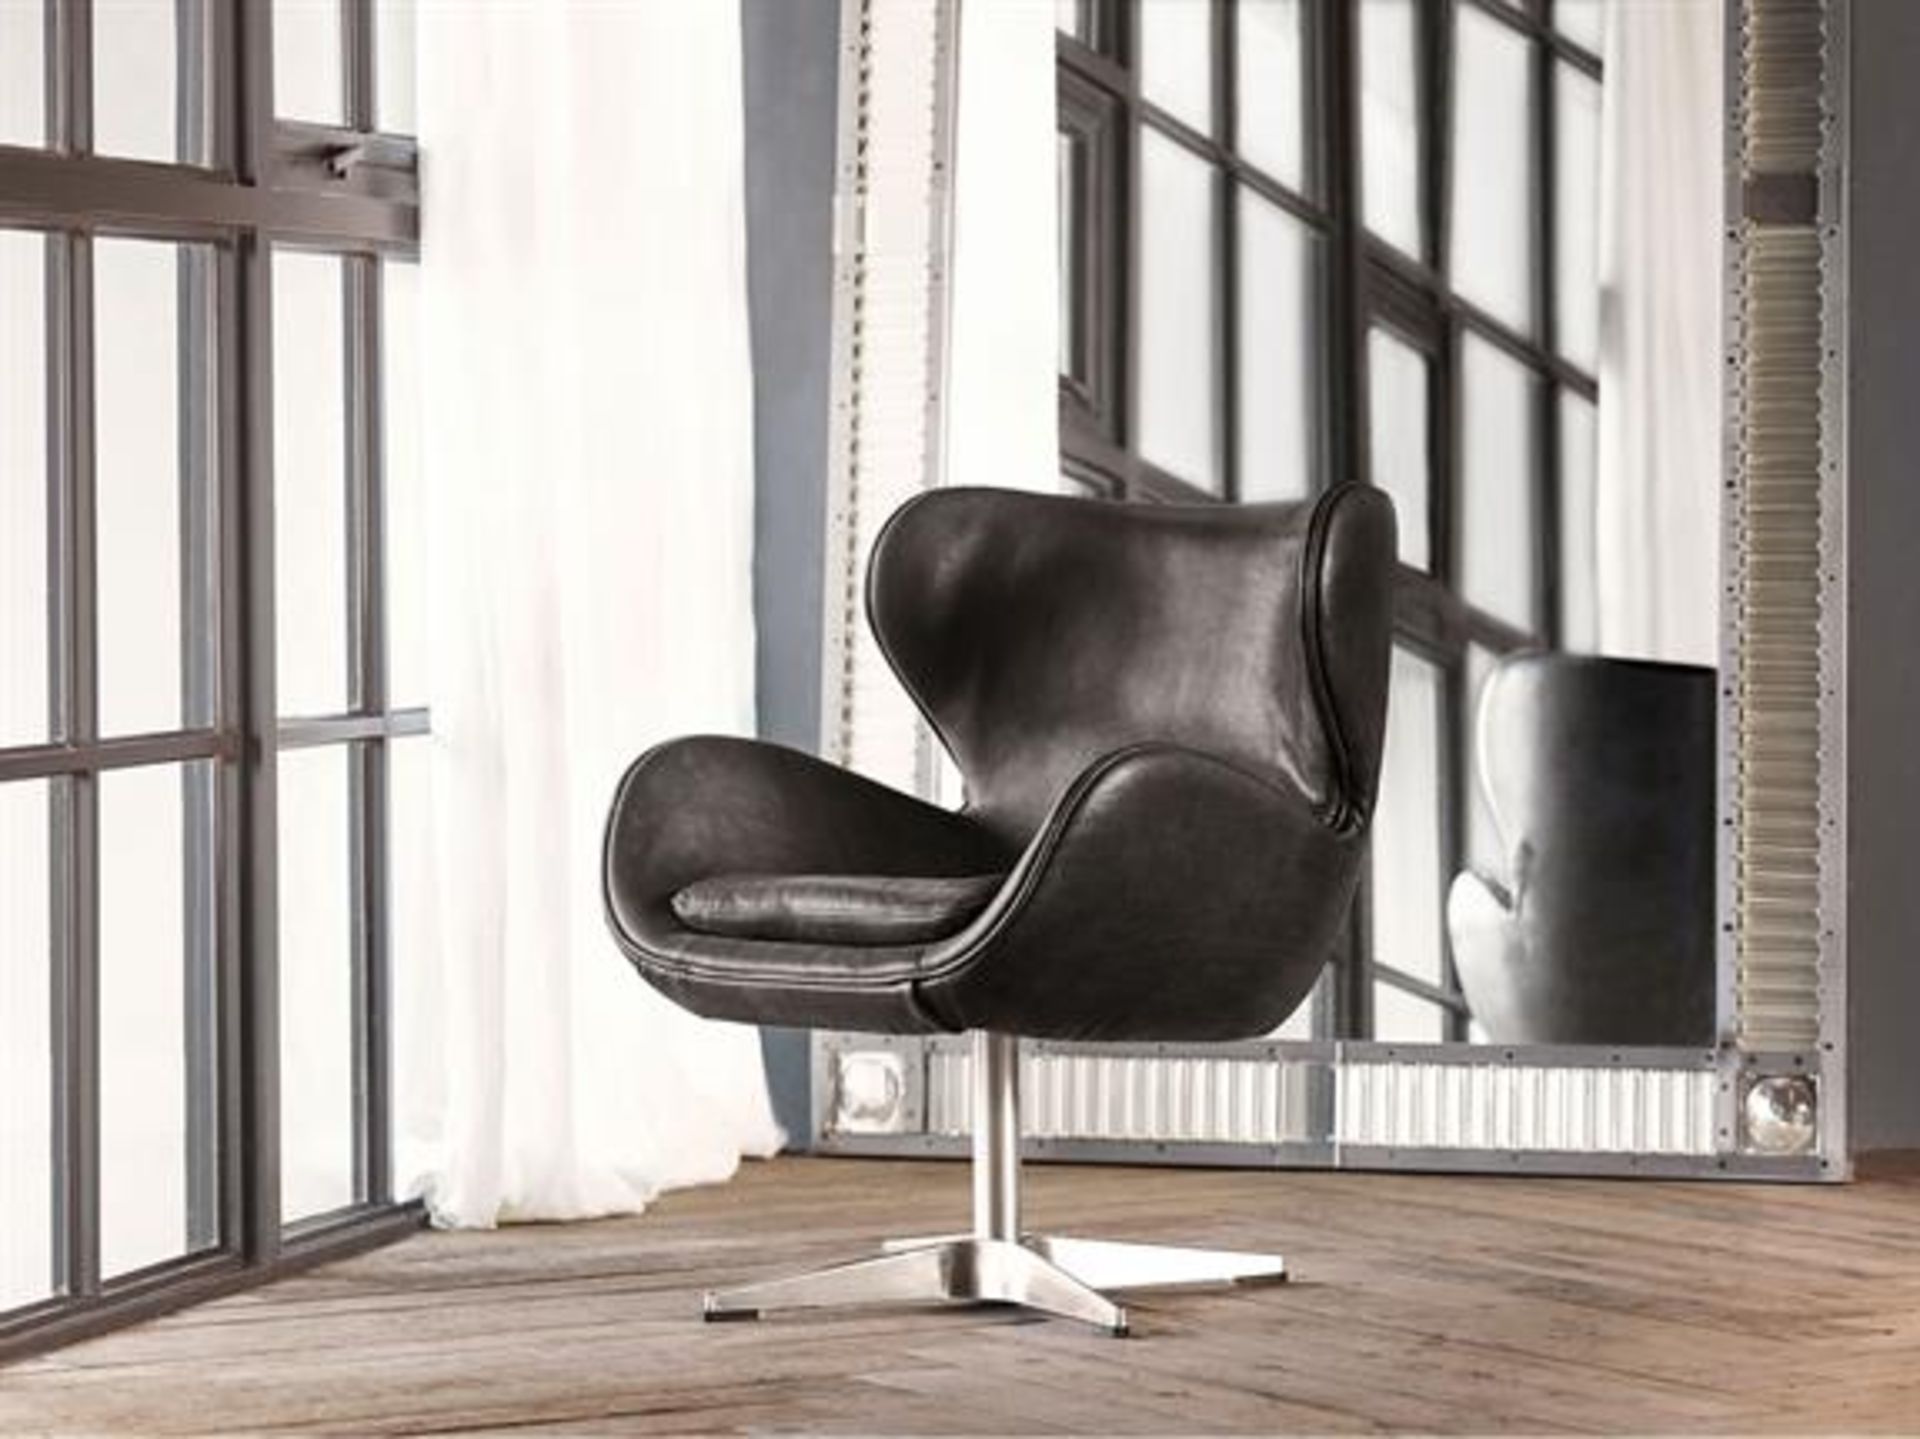 Simba Chair Finished In Antique Black With Metal Base 70 X 74 X 81cm